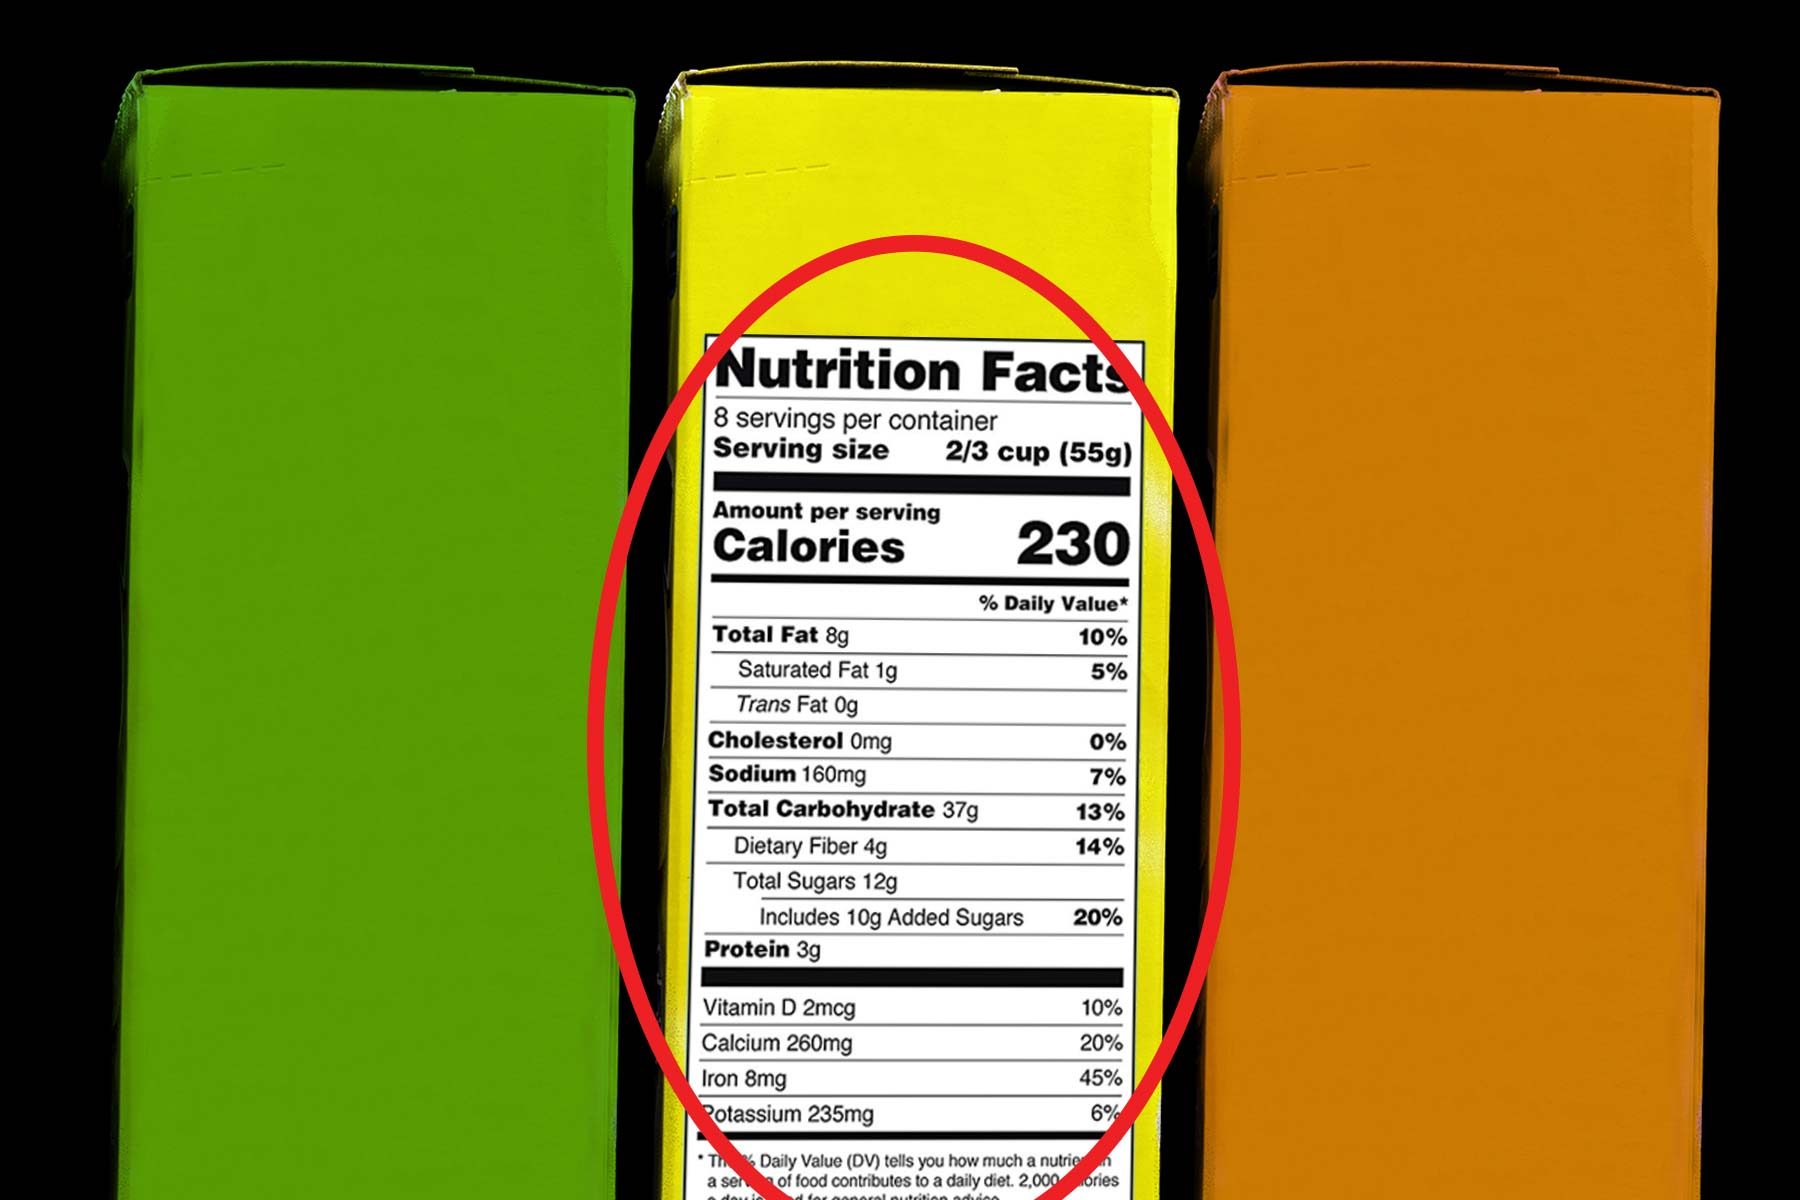 Warning: These Nutrition Label Updates Could Make You Gain Weight!